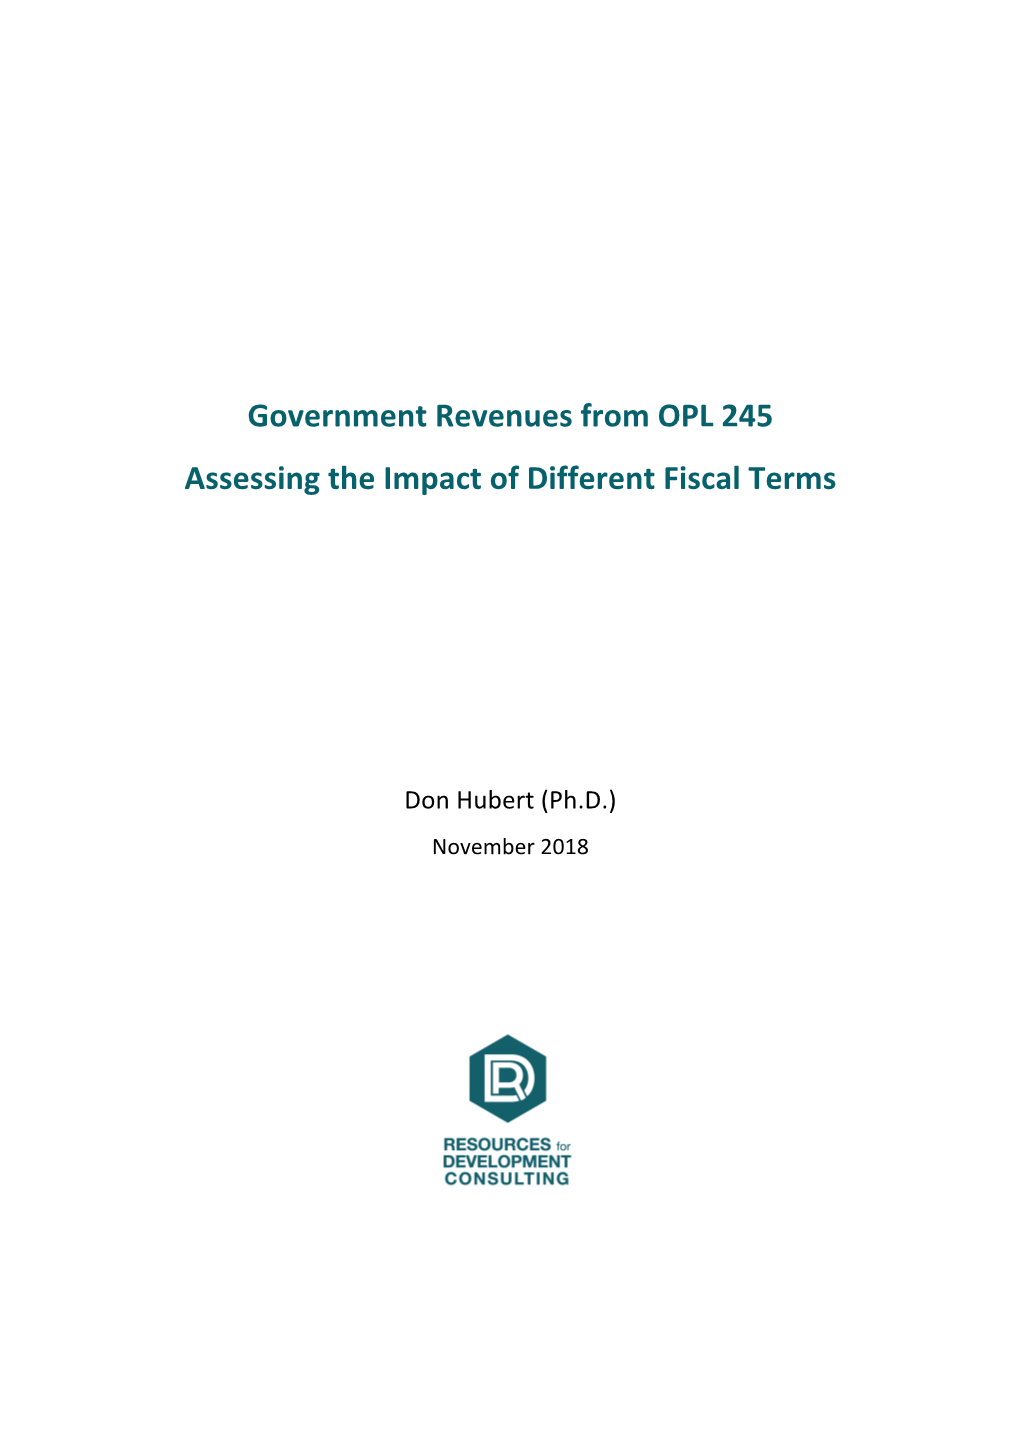 Government Revenues from OPL 245 Assessing the Impact of Different